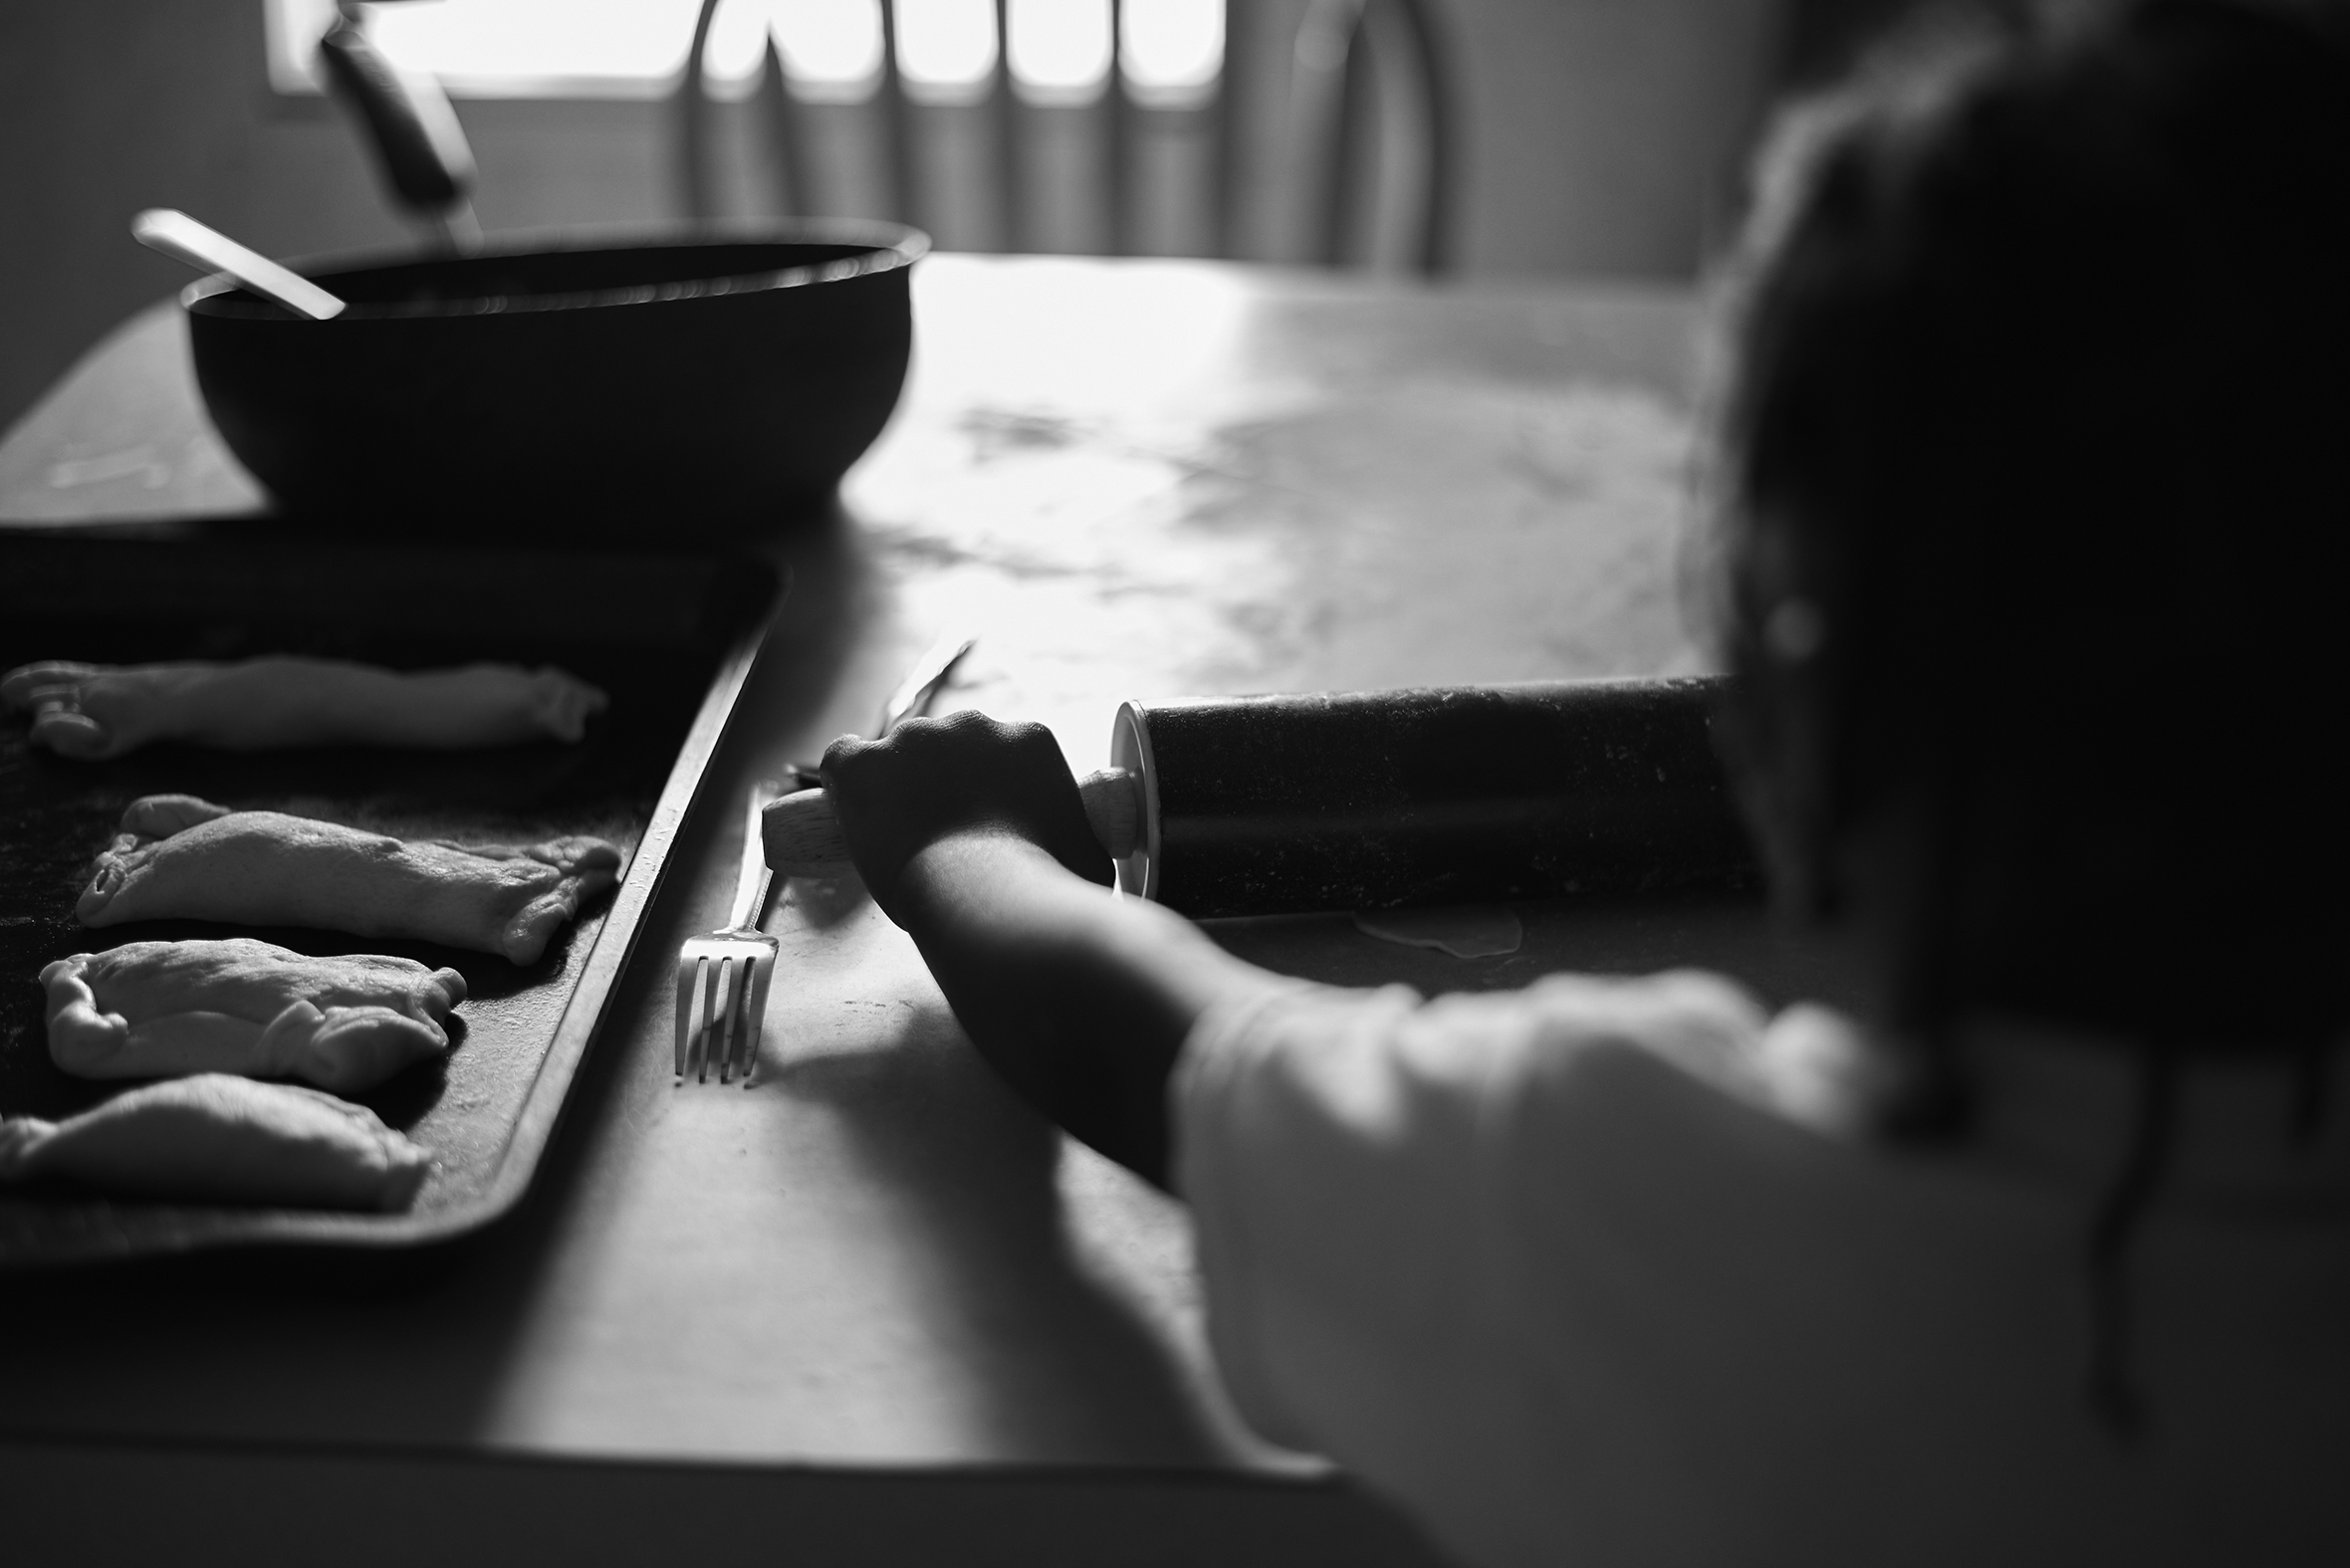 A young girl stands at a floured kitchen table rolling out a small amount of dough. A cookie tray with rectangular, stuffed dough creations on it is on the table to her left, and a bowl with a utensil handle sticking out is beyond the cookie tray.